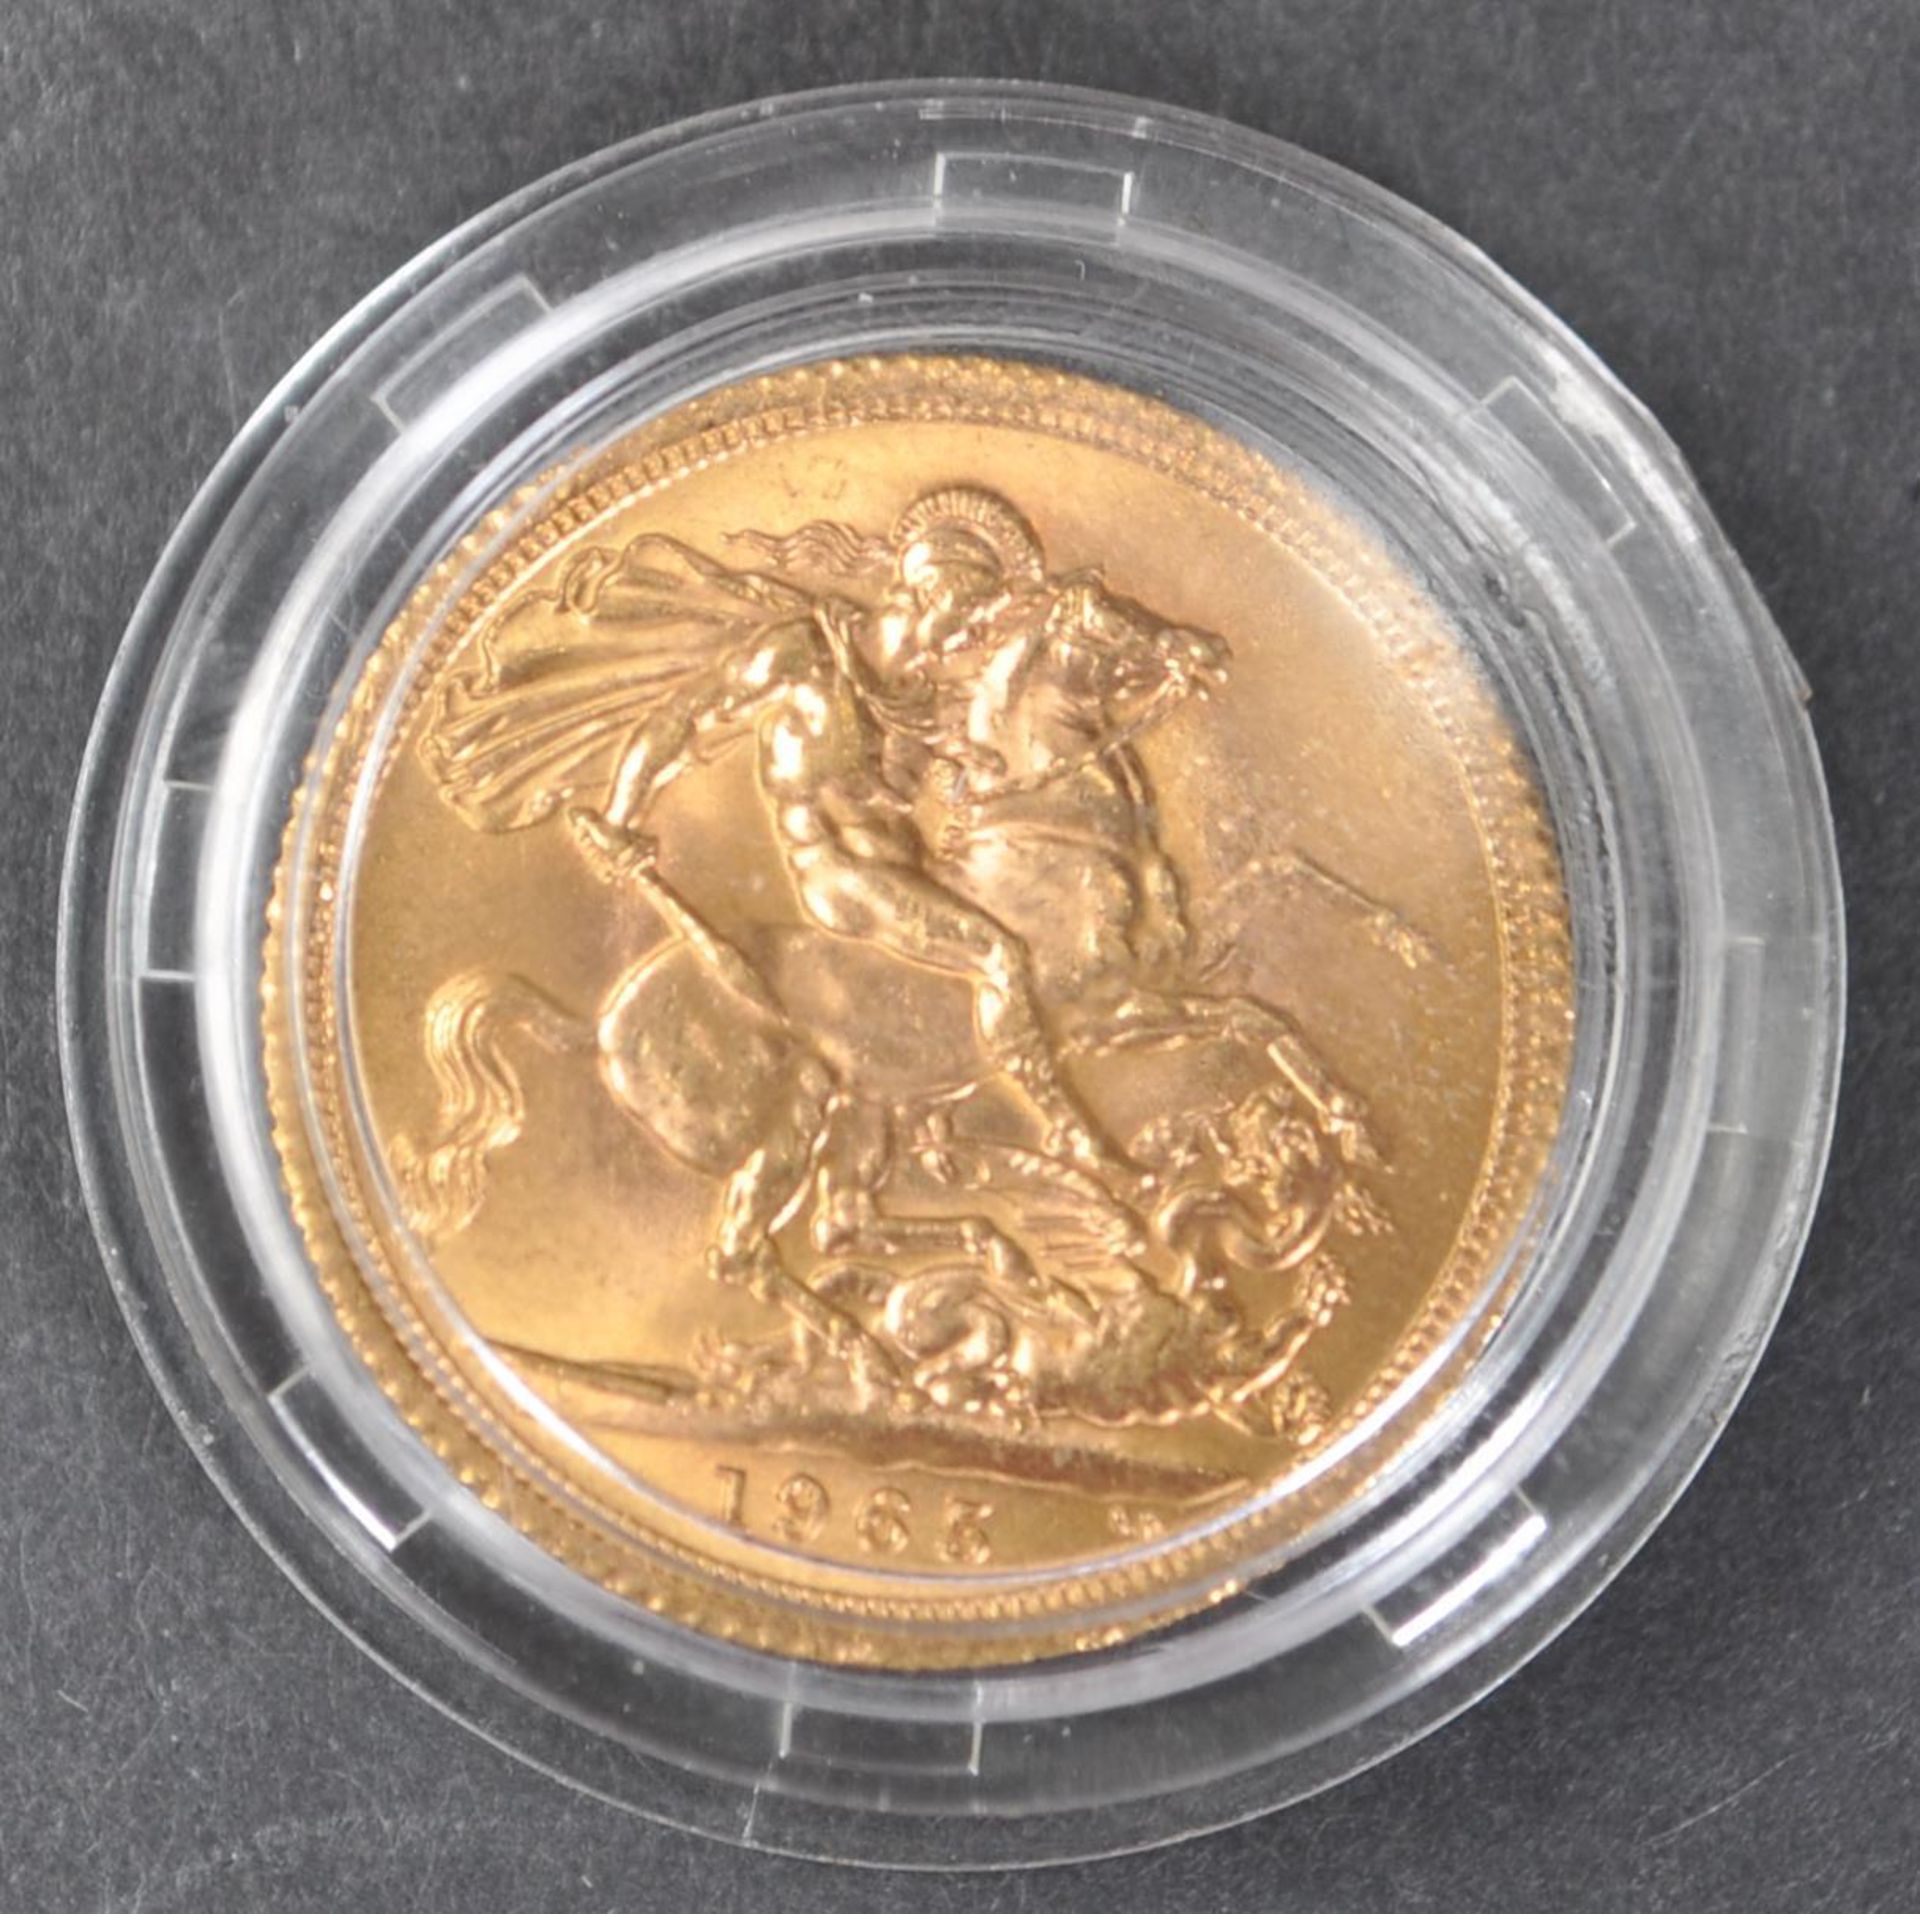 1965 ELIZABETH II 22CT GOLD SOVEREIGN COIN - Image 3 of 3